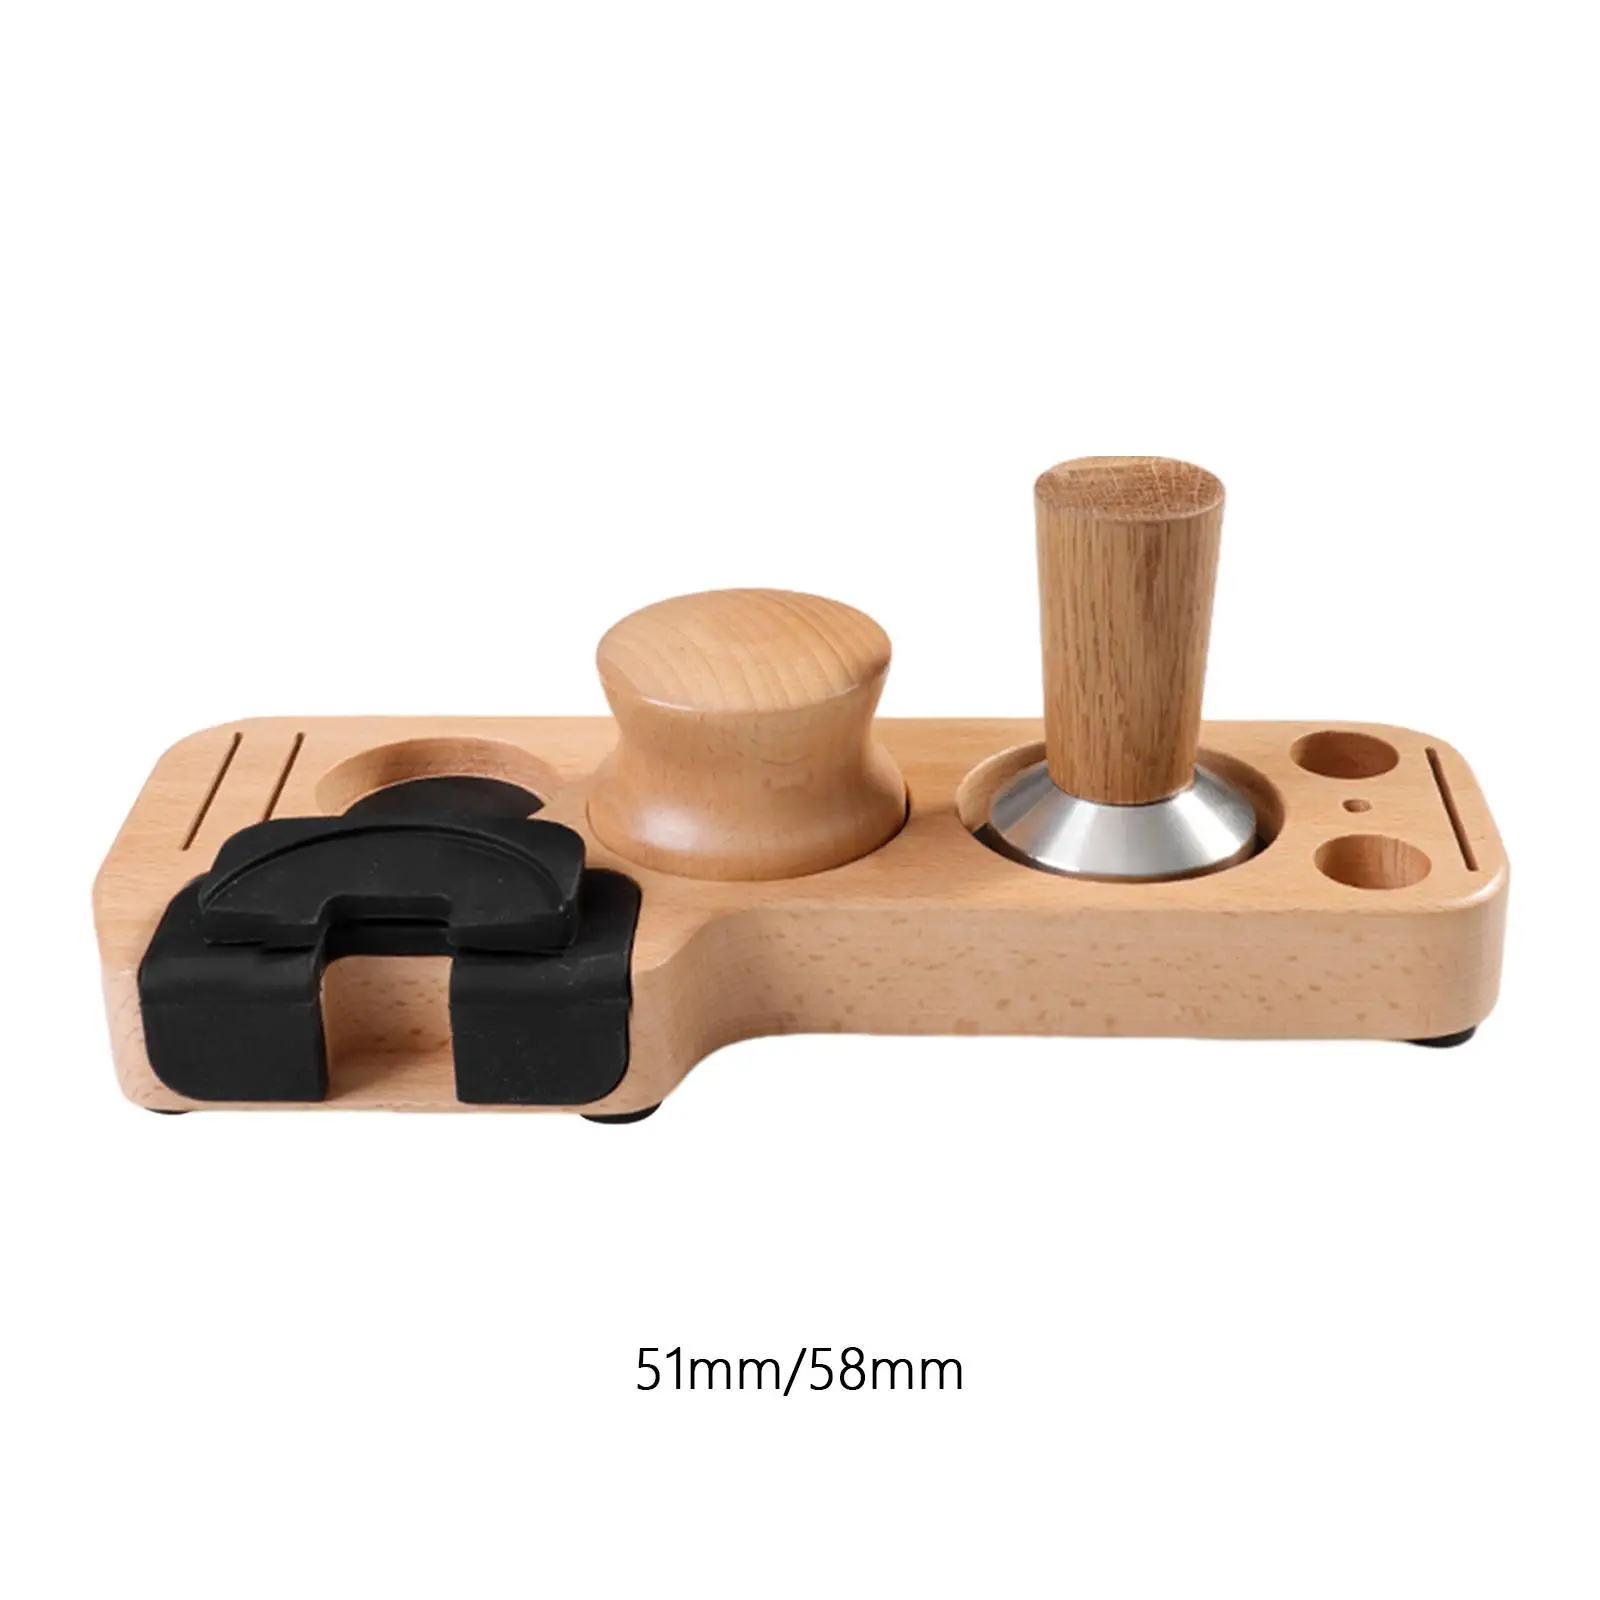 Espresso Tamper Station Partitioned Storage Coffee Tamper Distributor with Base for Worktop Counters Tearoom Shop Kitchens